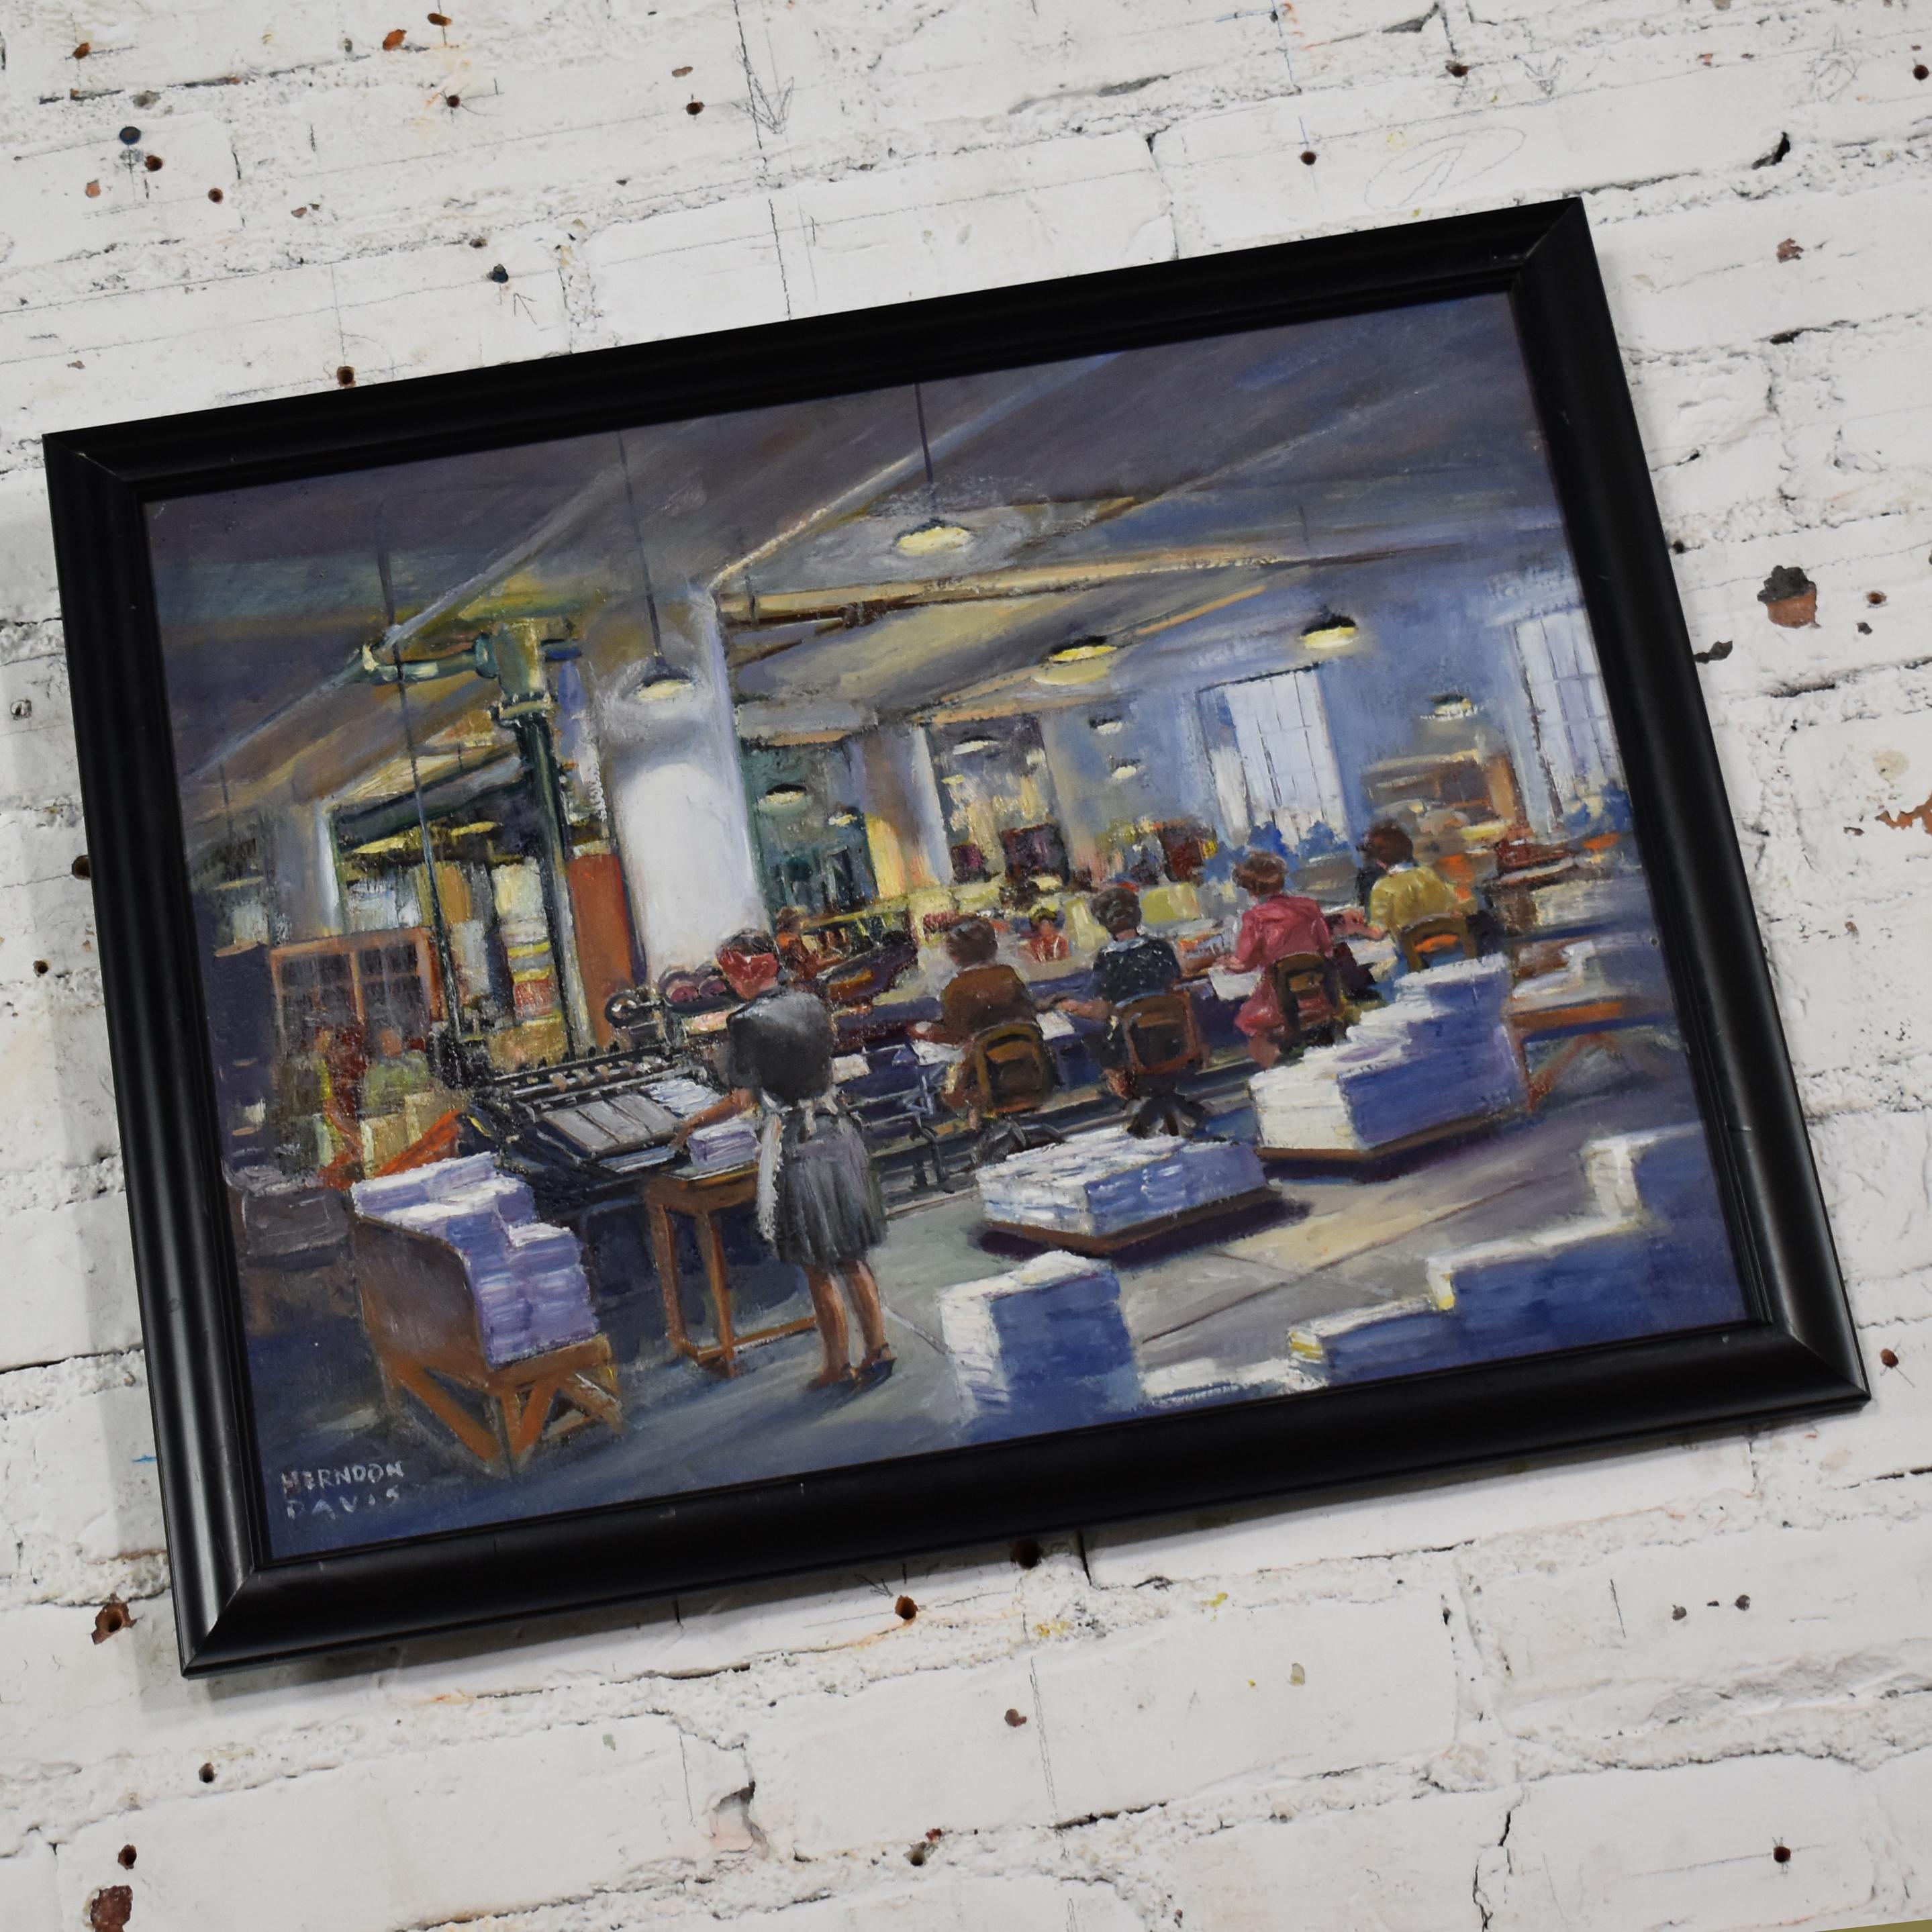 Incredible 1940s painting by Colorado artist Herndon Davis depicting an industrial interior and workers. It is in wonderful vintage condition, but you may want to reframe. Please see photos, circa 1940s.

This fabulous industrial style painting is